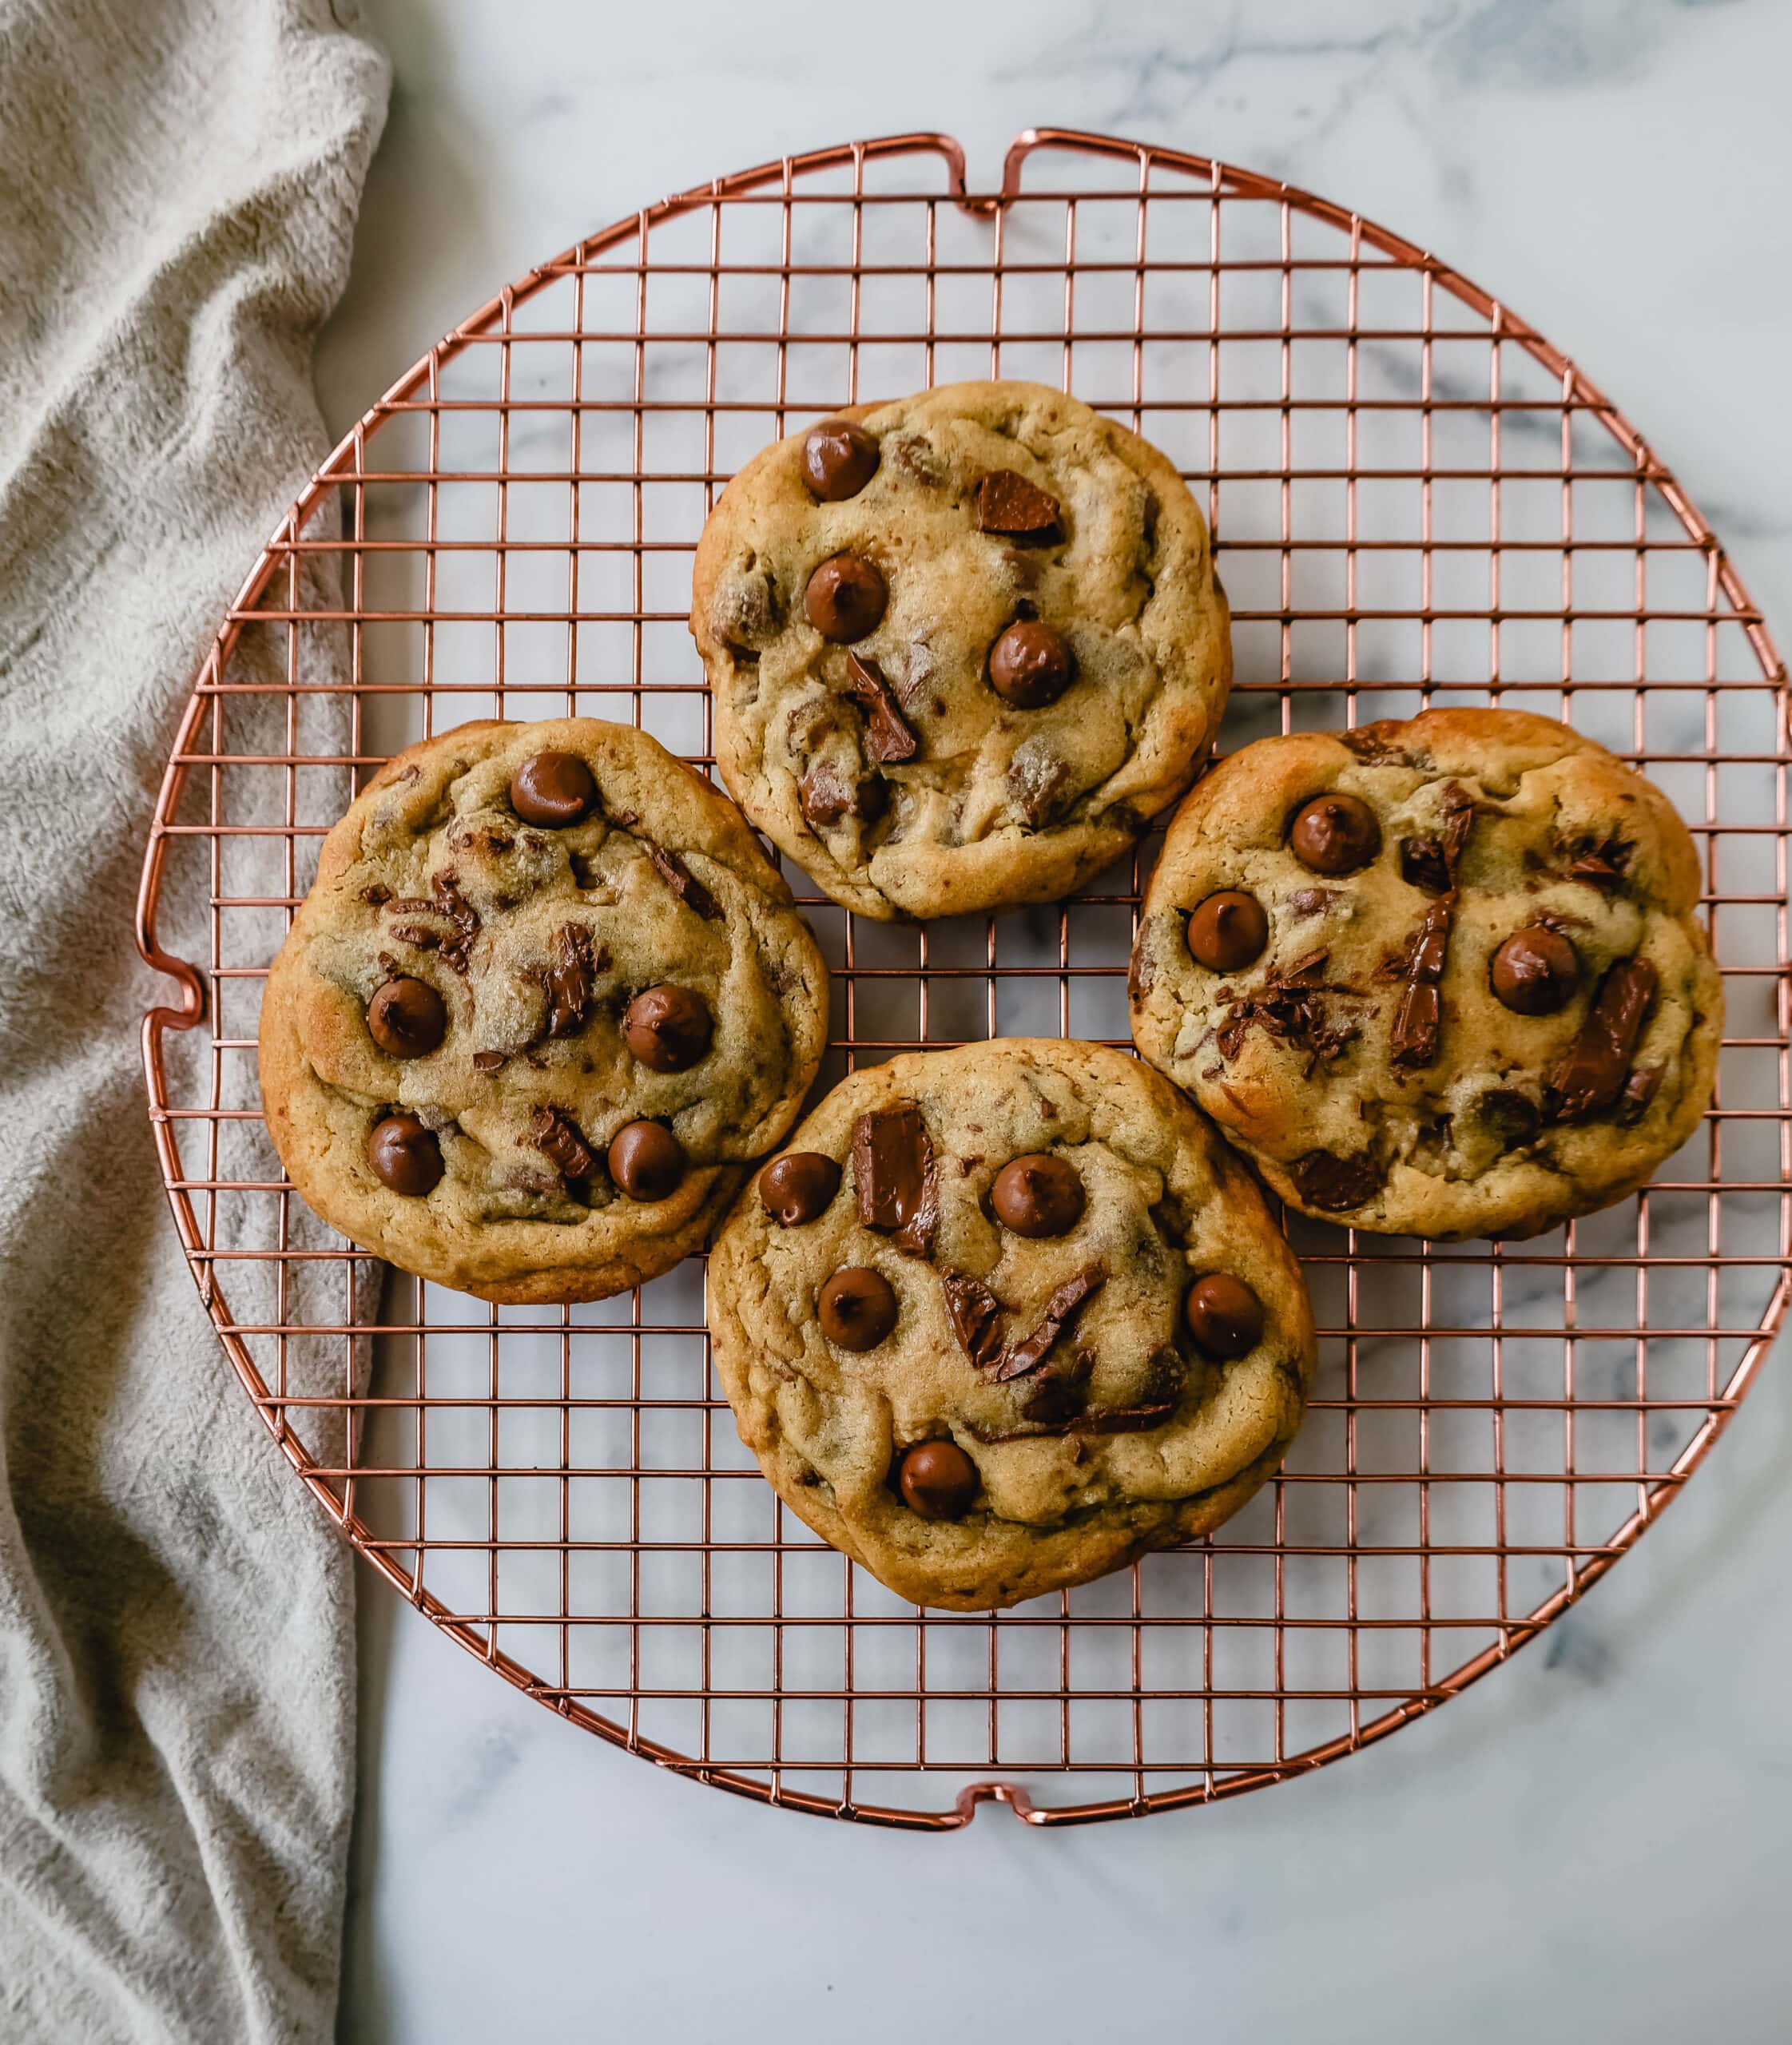 Thick, chewy milk chocolate chip cookies have the perfect chewy centers with a lot of melted chocolate and slightly crispy edges. The best milk chocolate chip cookie recipe!